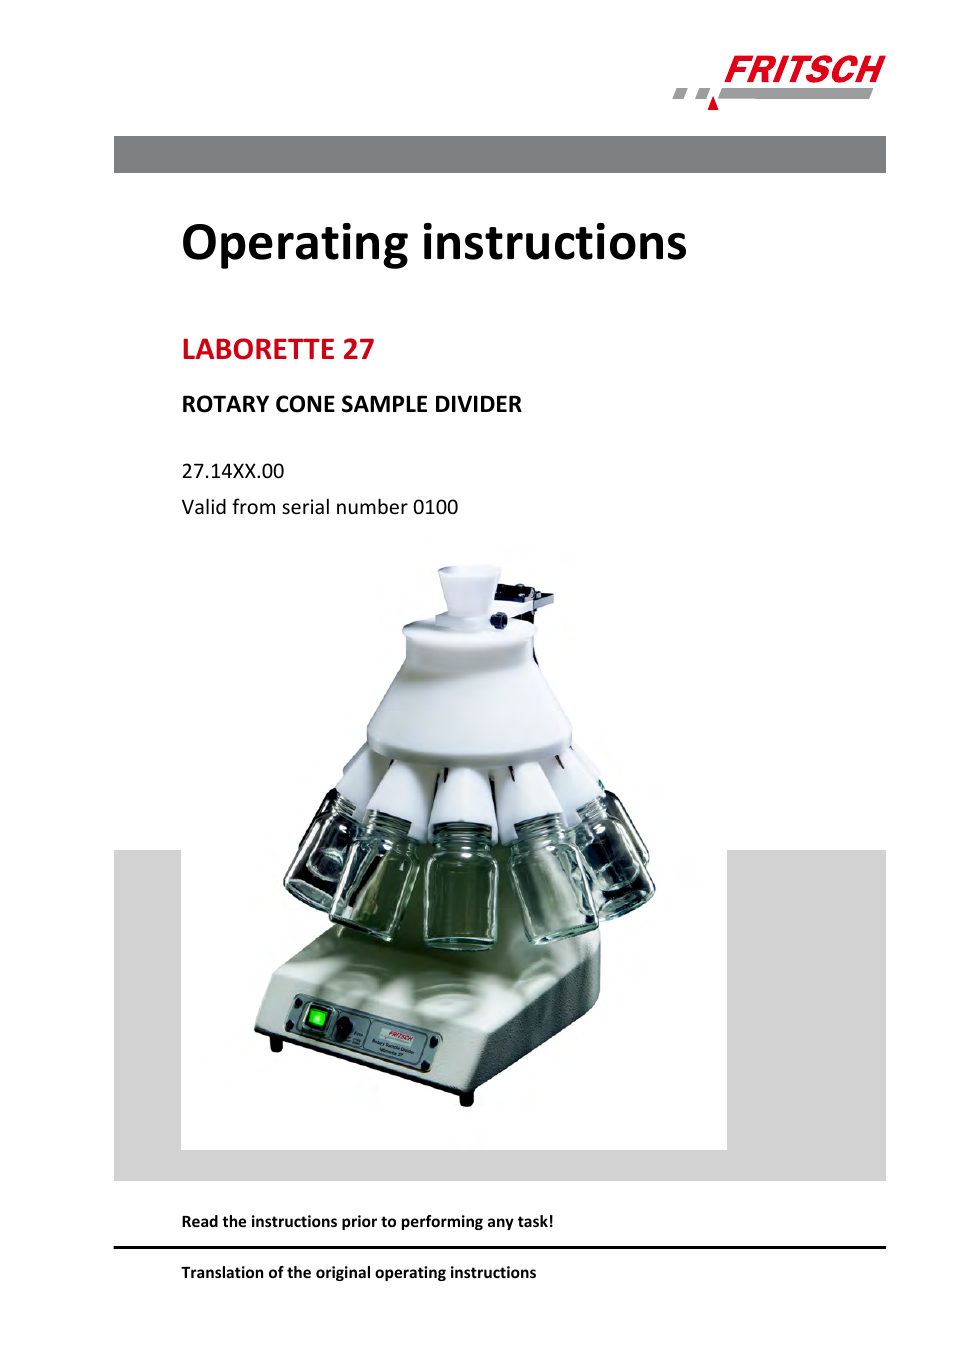 FRITSCH LABORETTE 27 User Manual | 36 pages